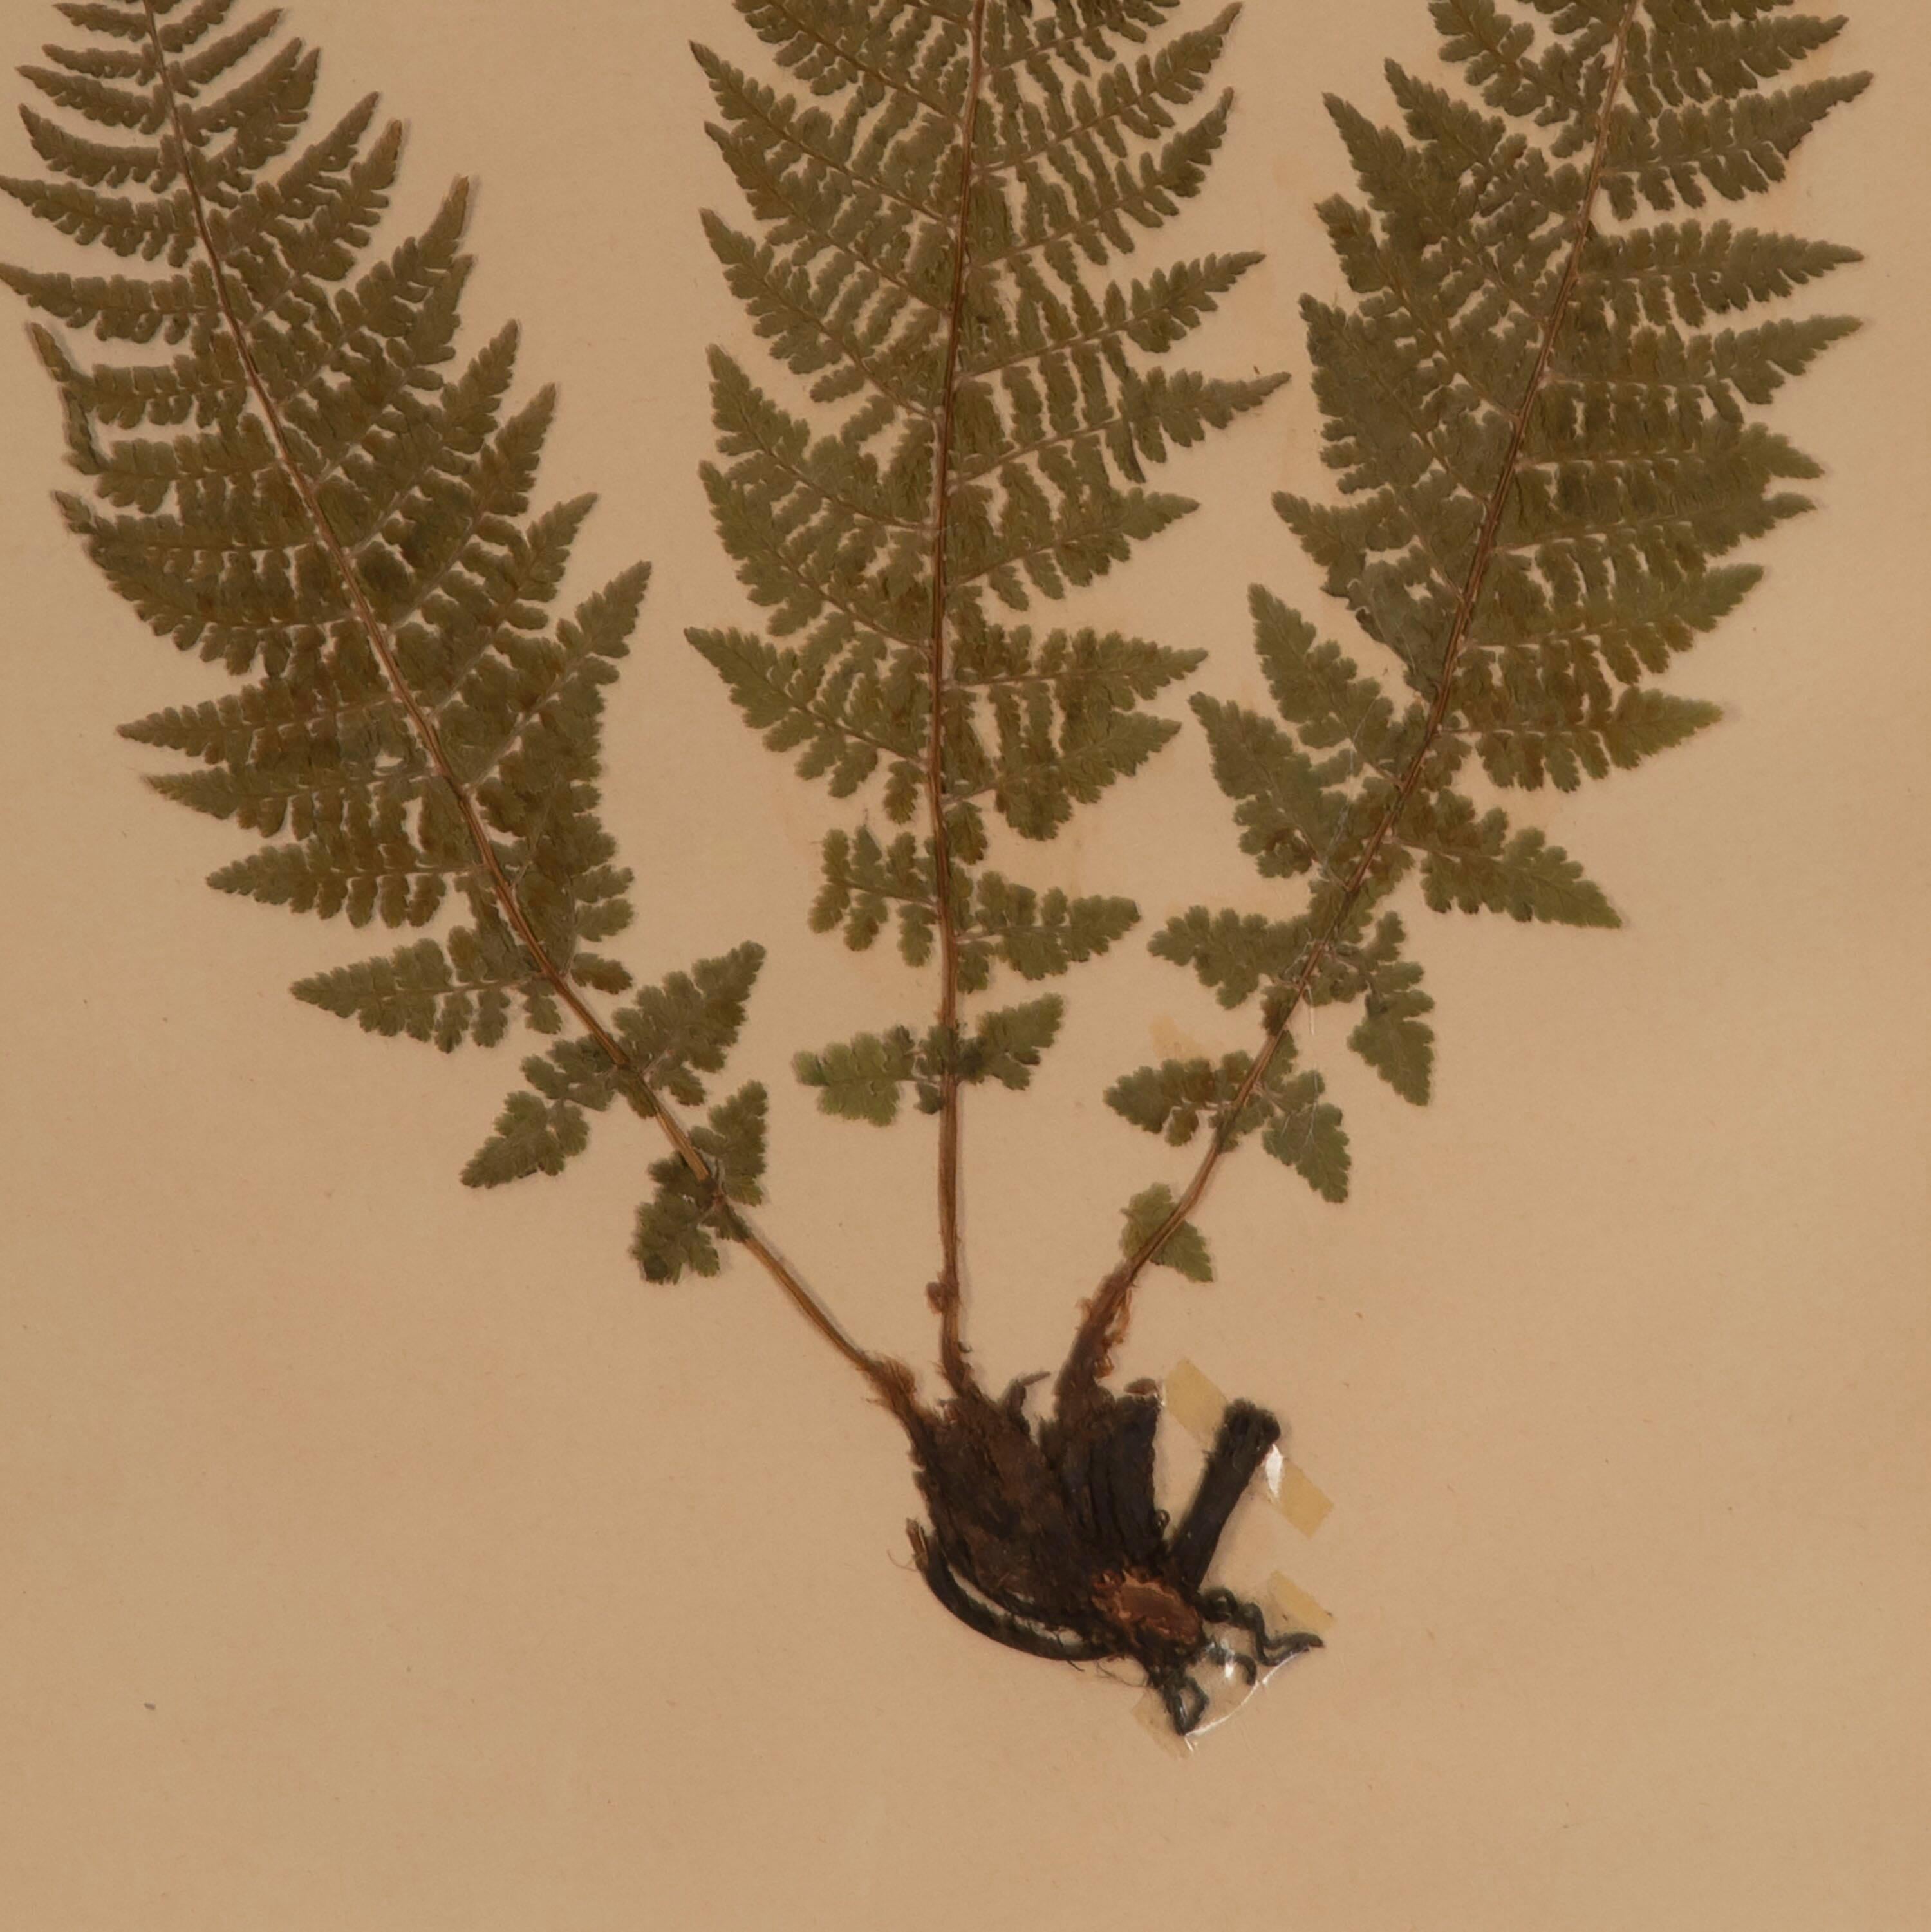 Fine collection of 19th century herbarium of various ferns. They have been mounted and framed in wooden faux bamboo made in Italy, and tru vu glass that affords some protection.